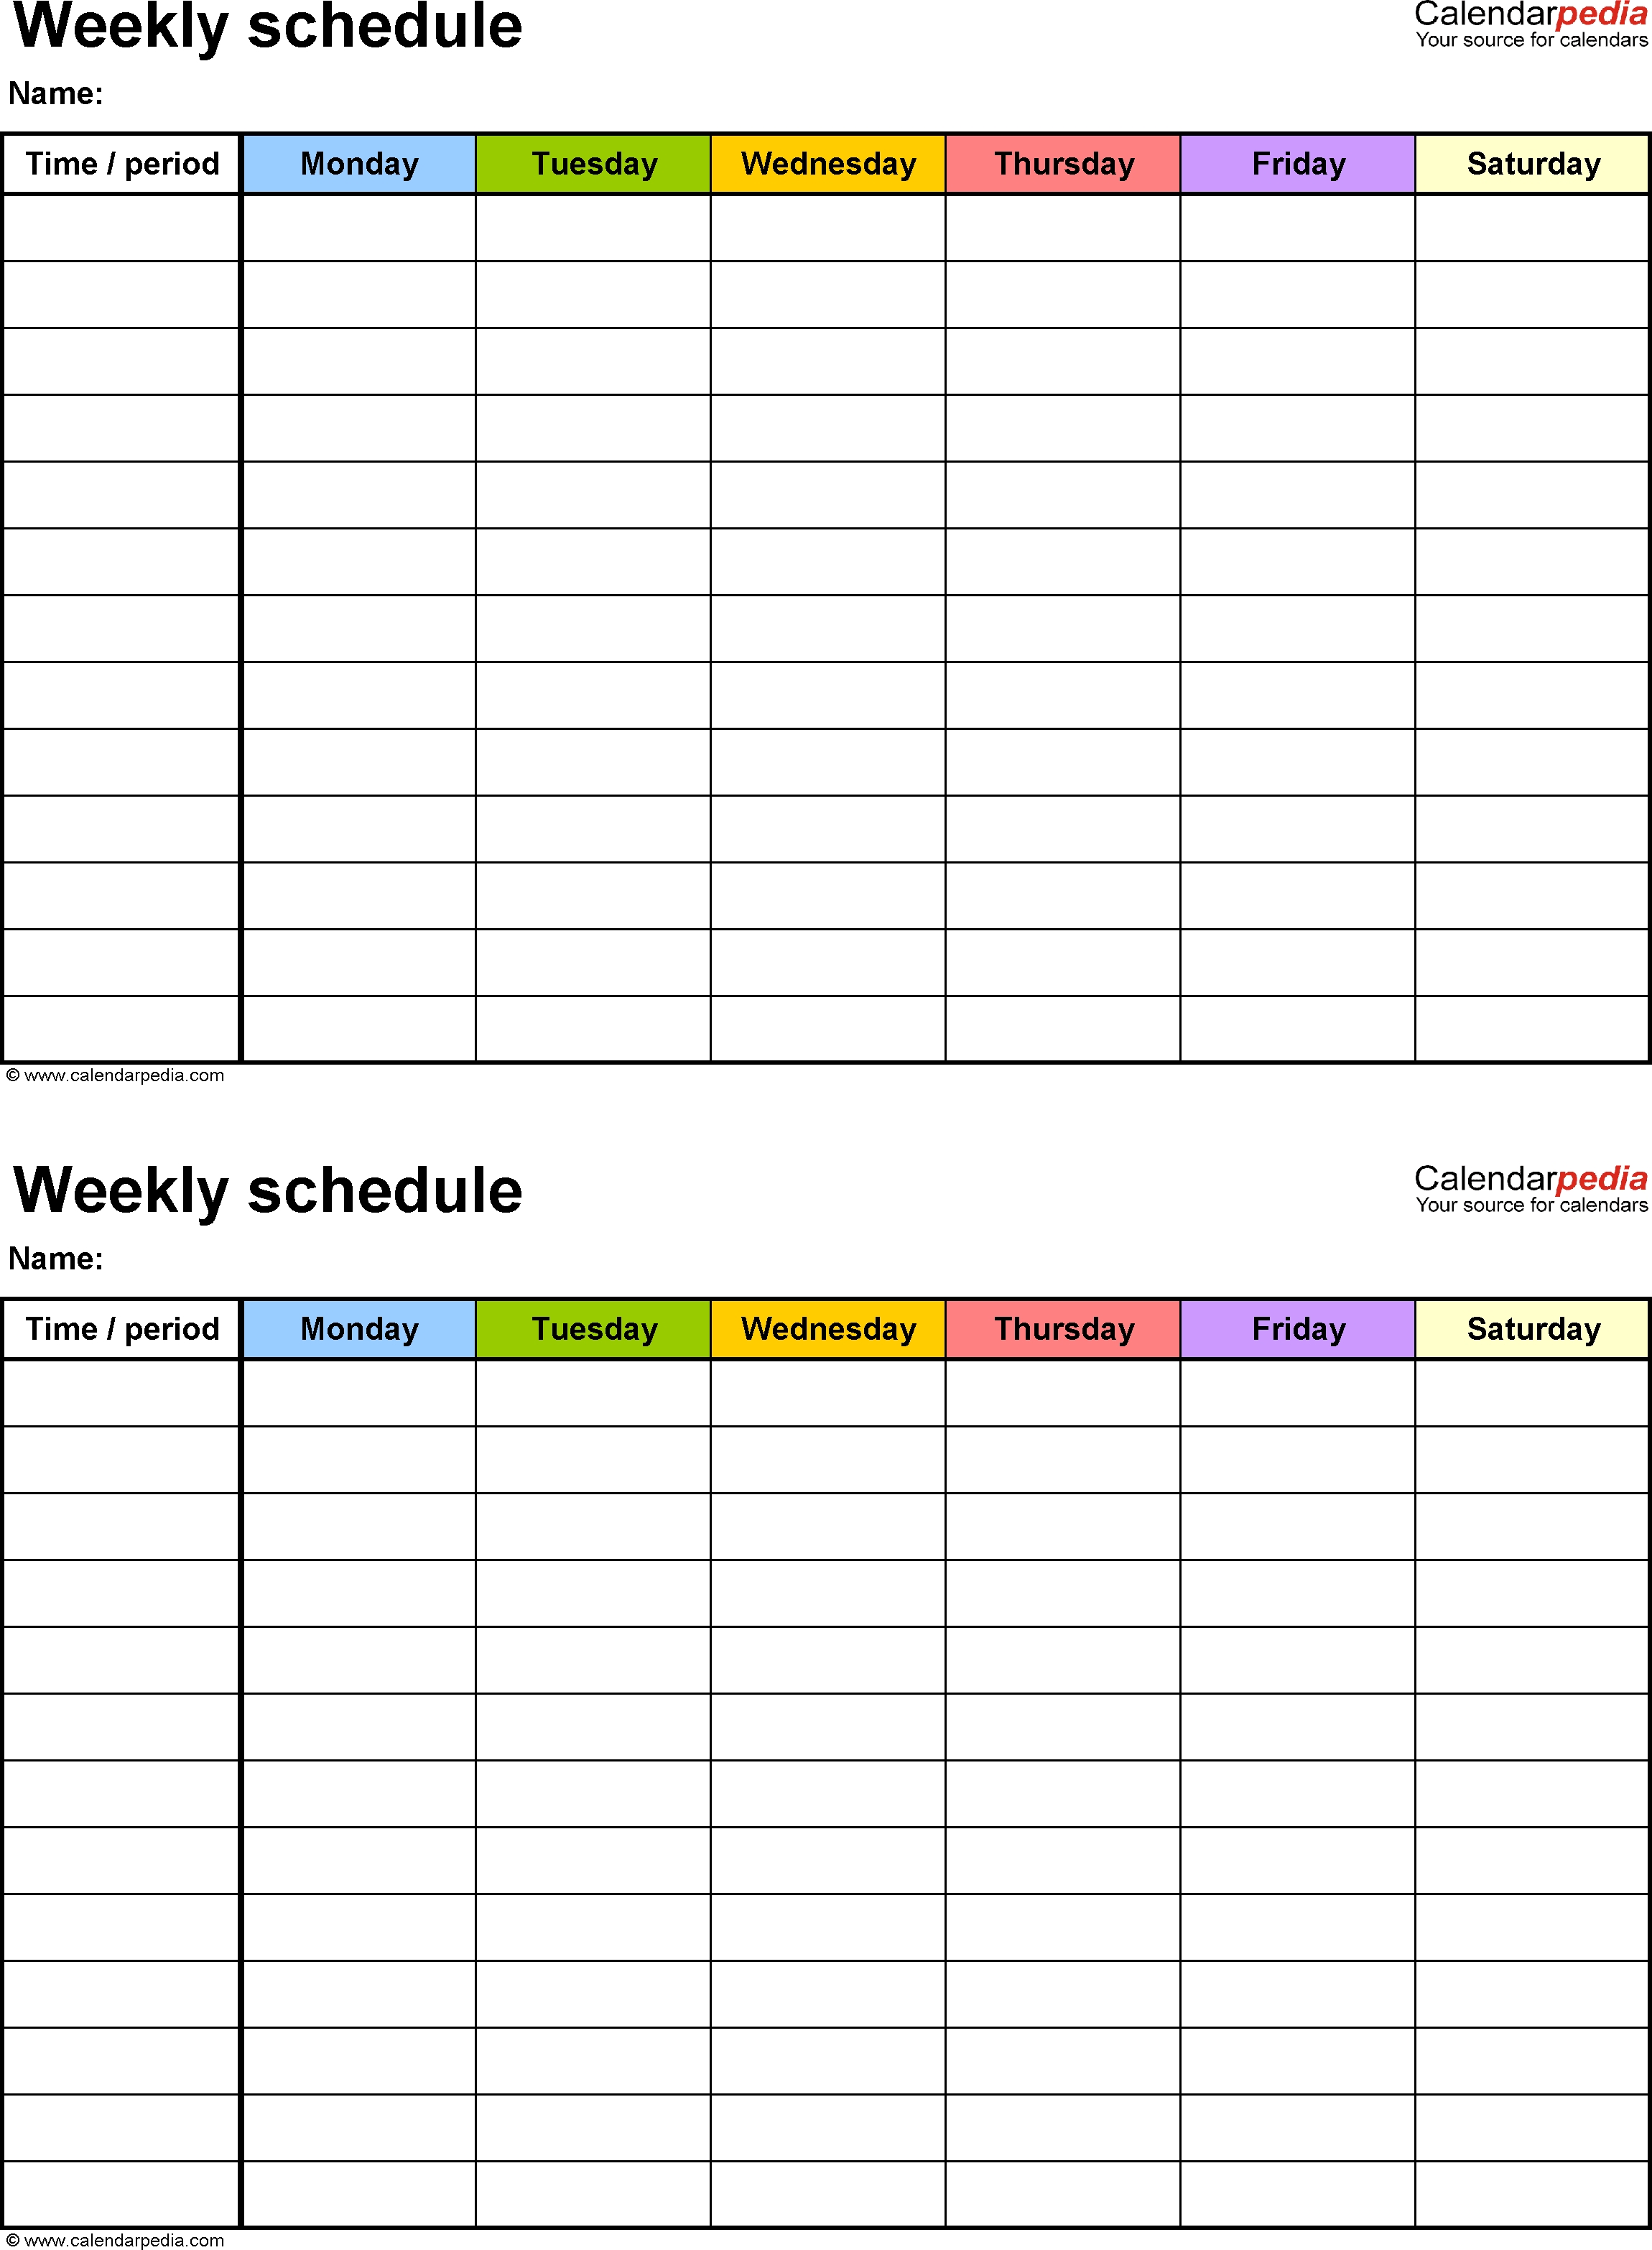 Free Weekly Schedule Templates For Word - 18 Templates with 7 Day Week Blank Calendar Printable